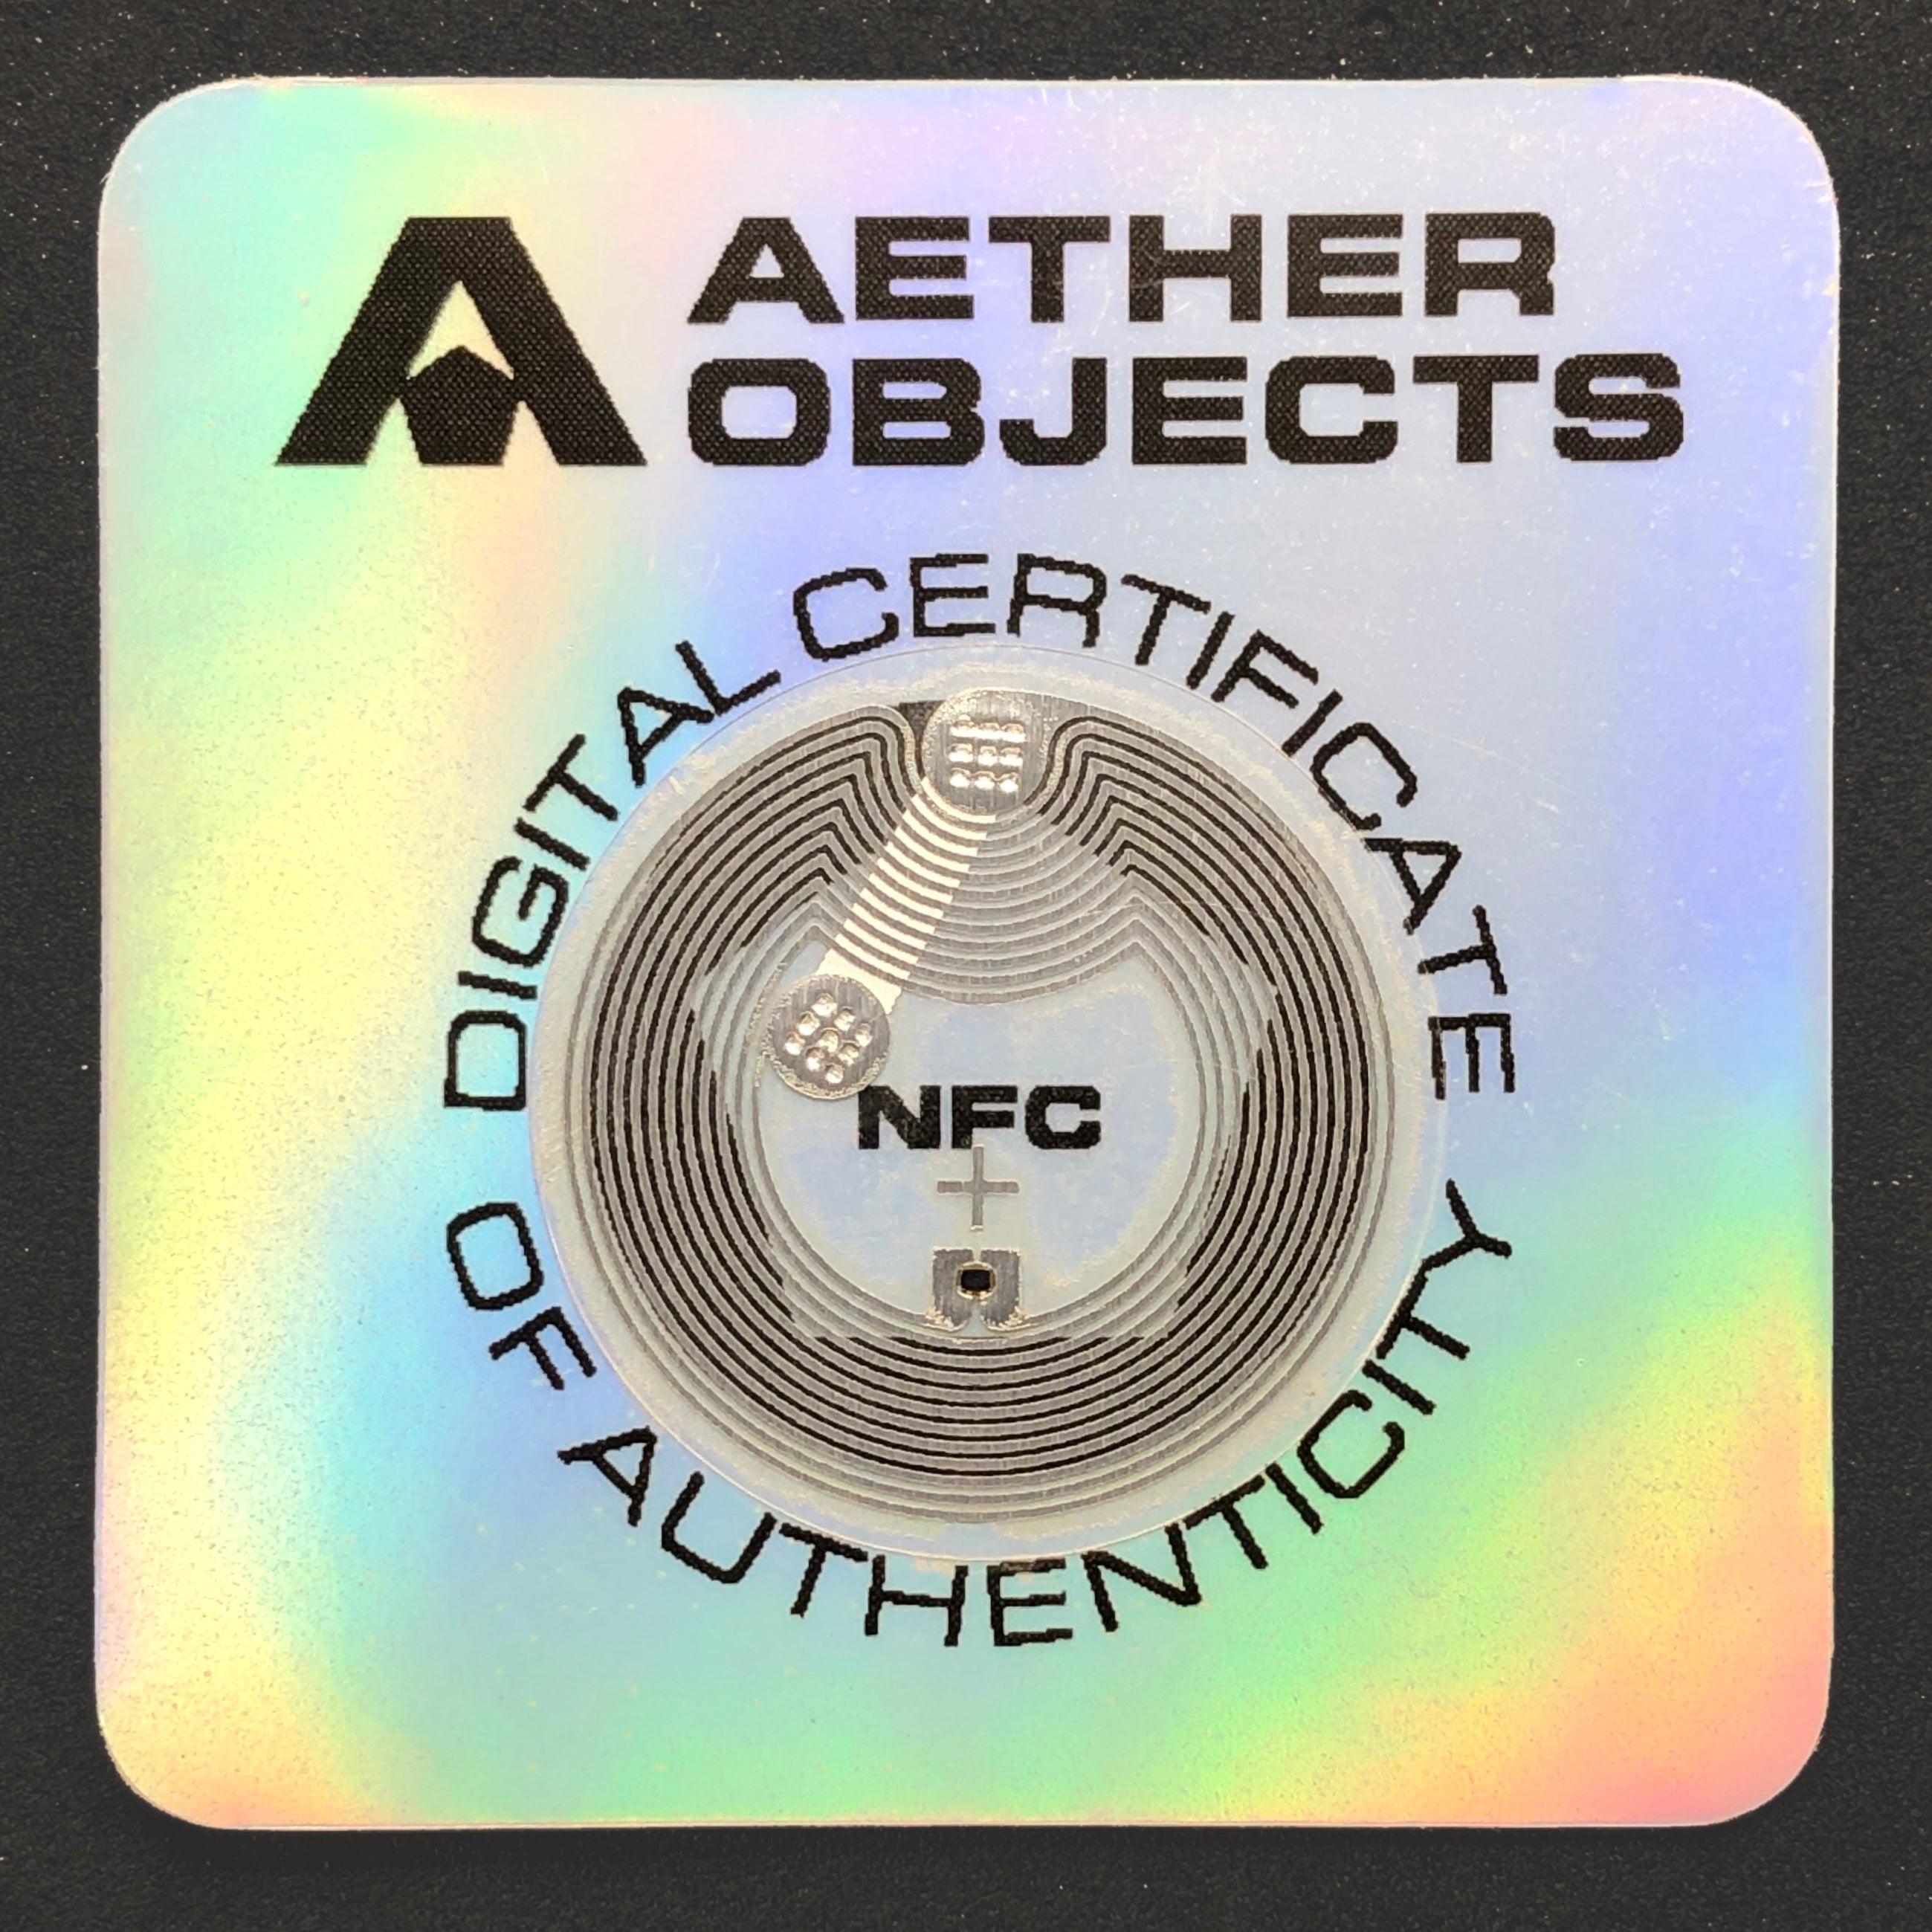 Aether Objects Digital Certificate of Authenticity